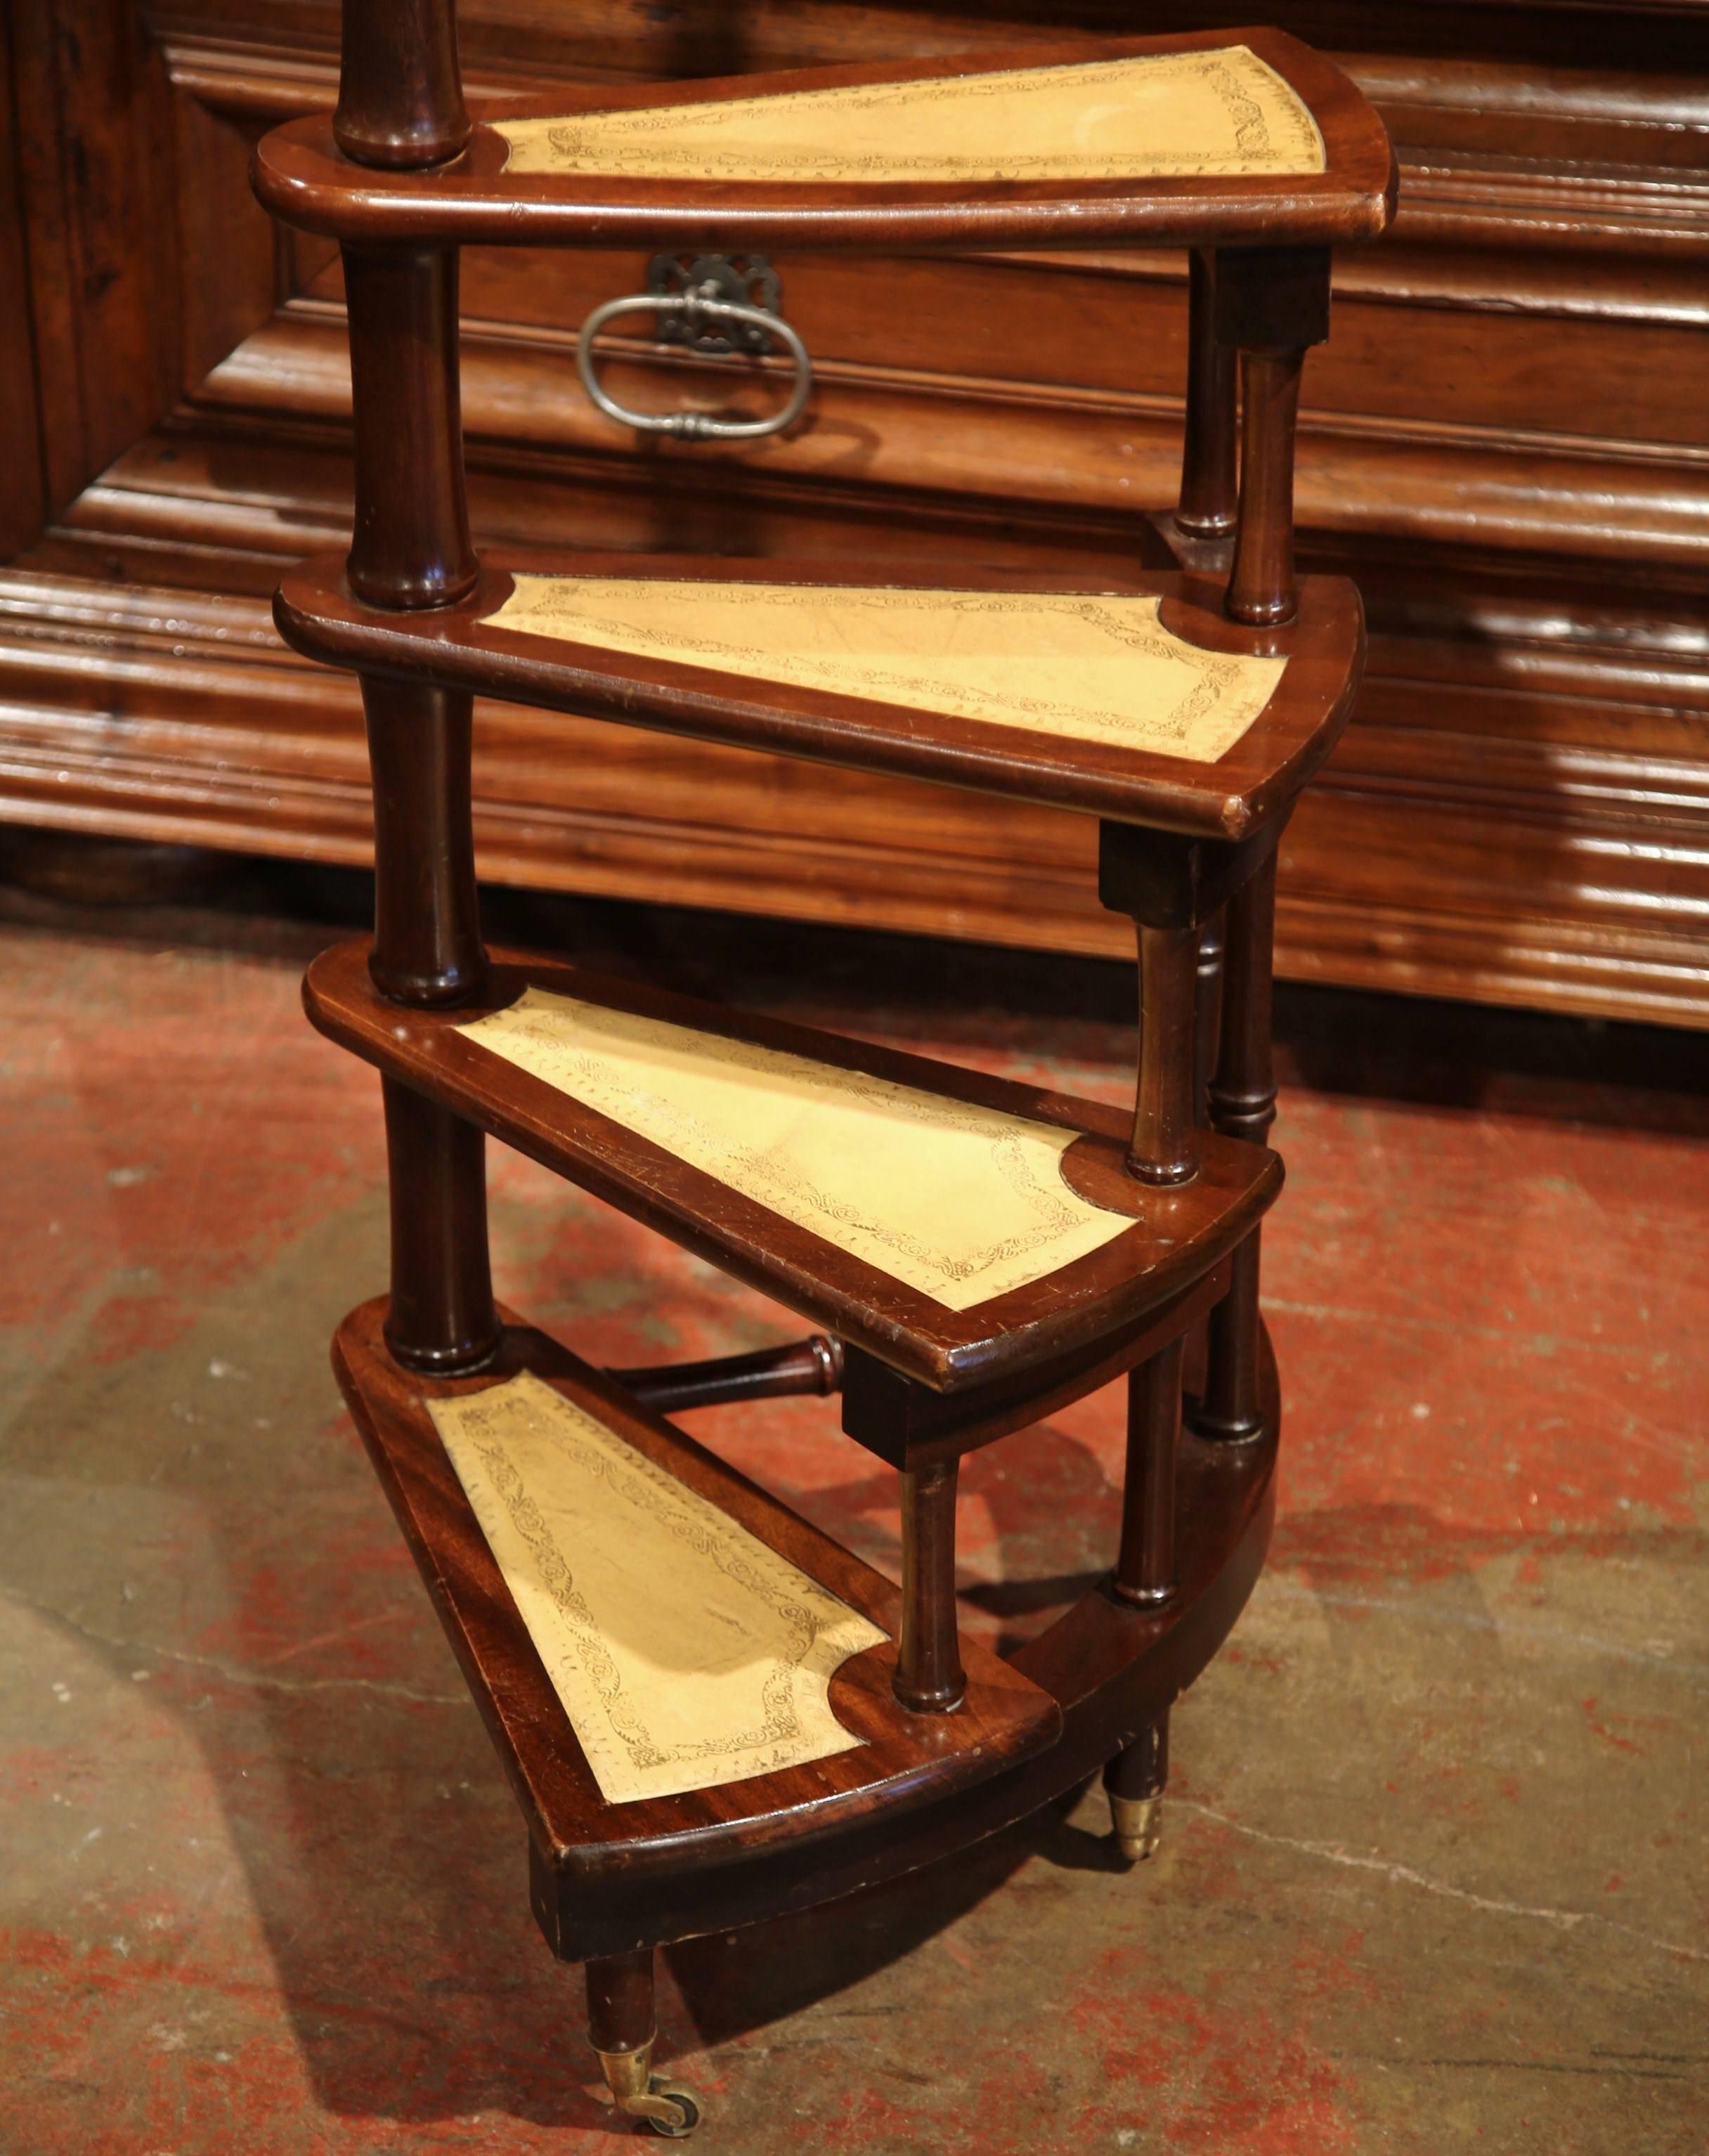 This set of vintage mahogany library stairs were created in England, circa 1950. The thin steps come from a central, circular steps and spiral out for extra height with a slim profile. The steps are covered with leather and tooling, and has a brass